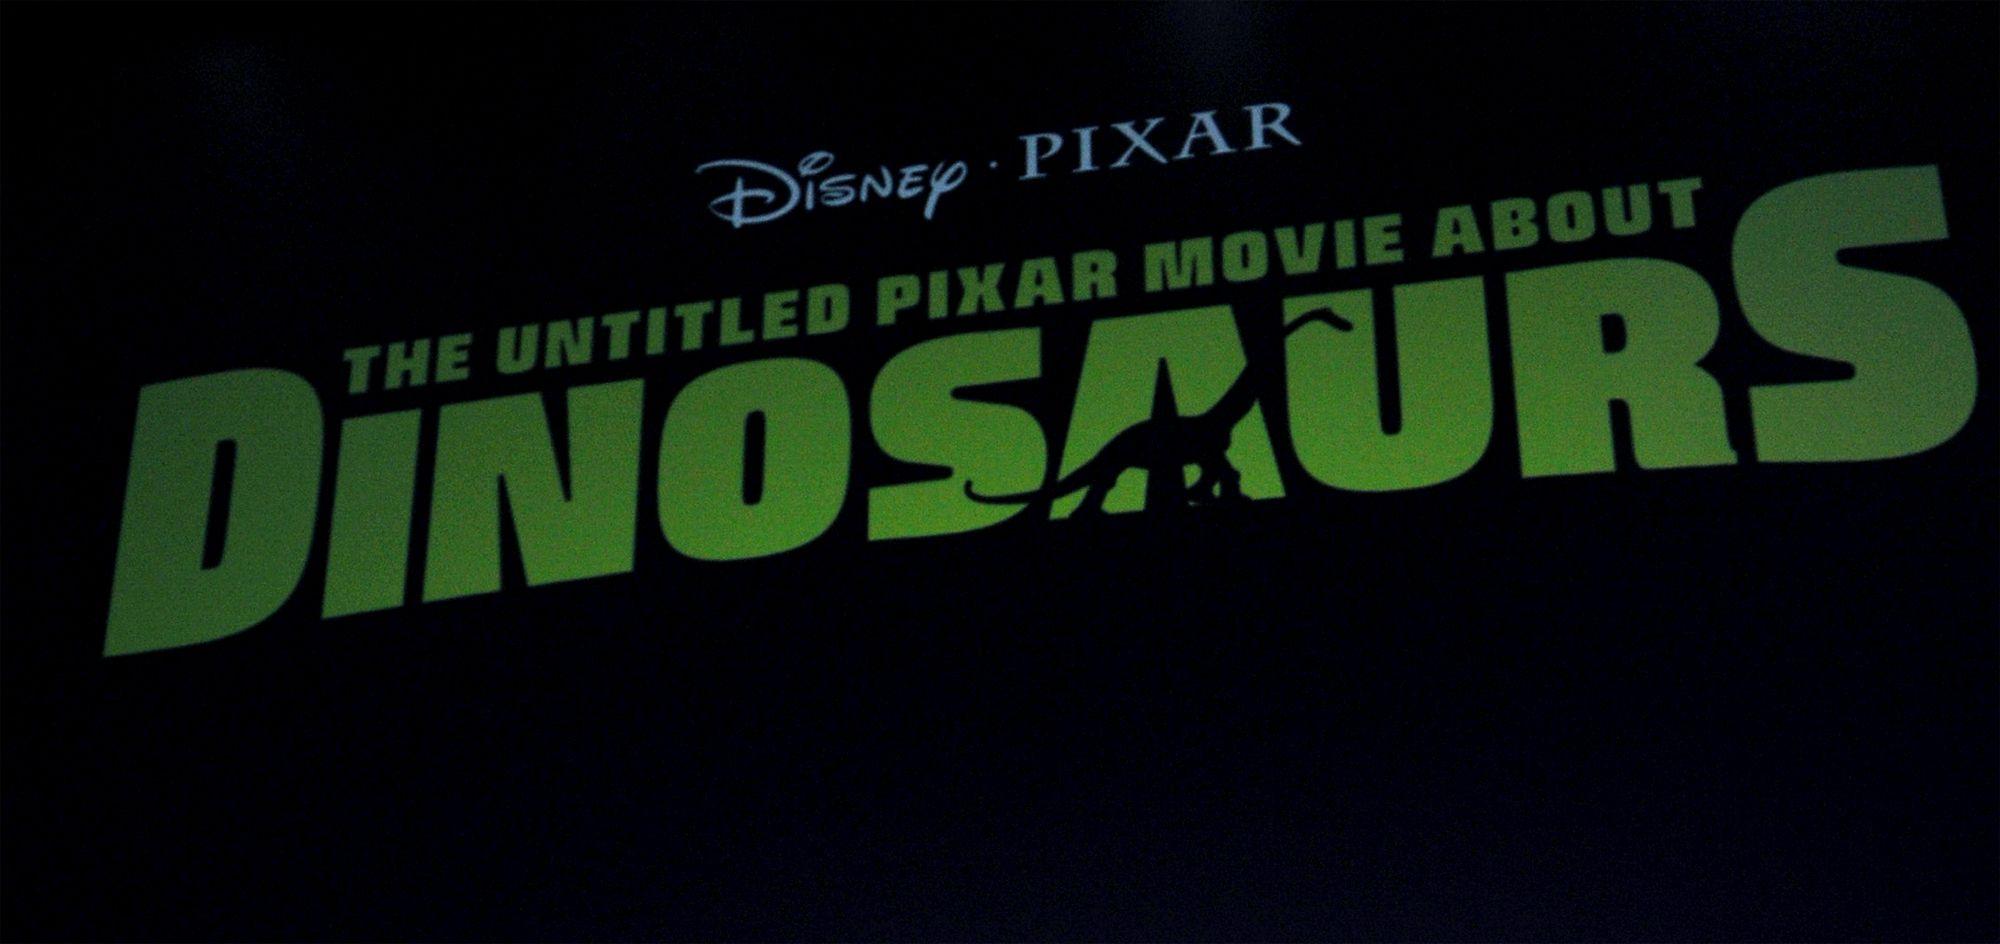 Disney Pixar Films Logo - LOL: See the Temp Logo For 'The Untitled Pixar Movie About Dinosaurs ...